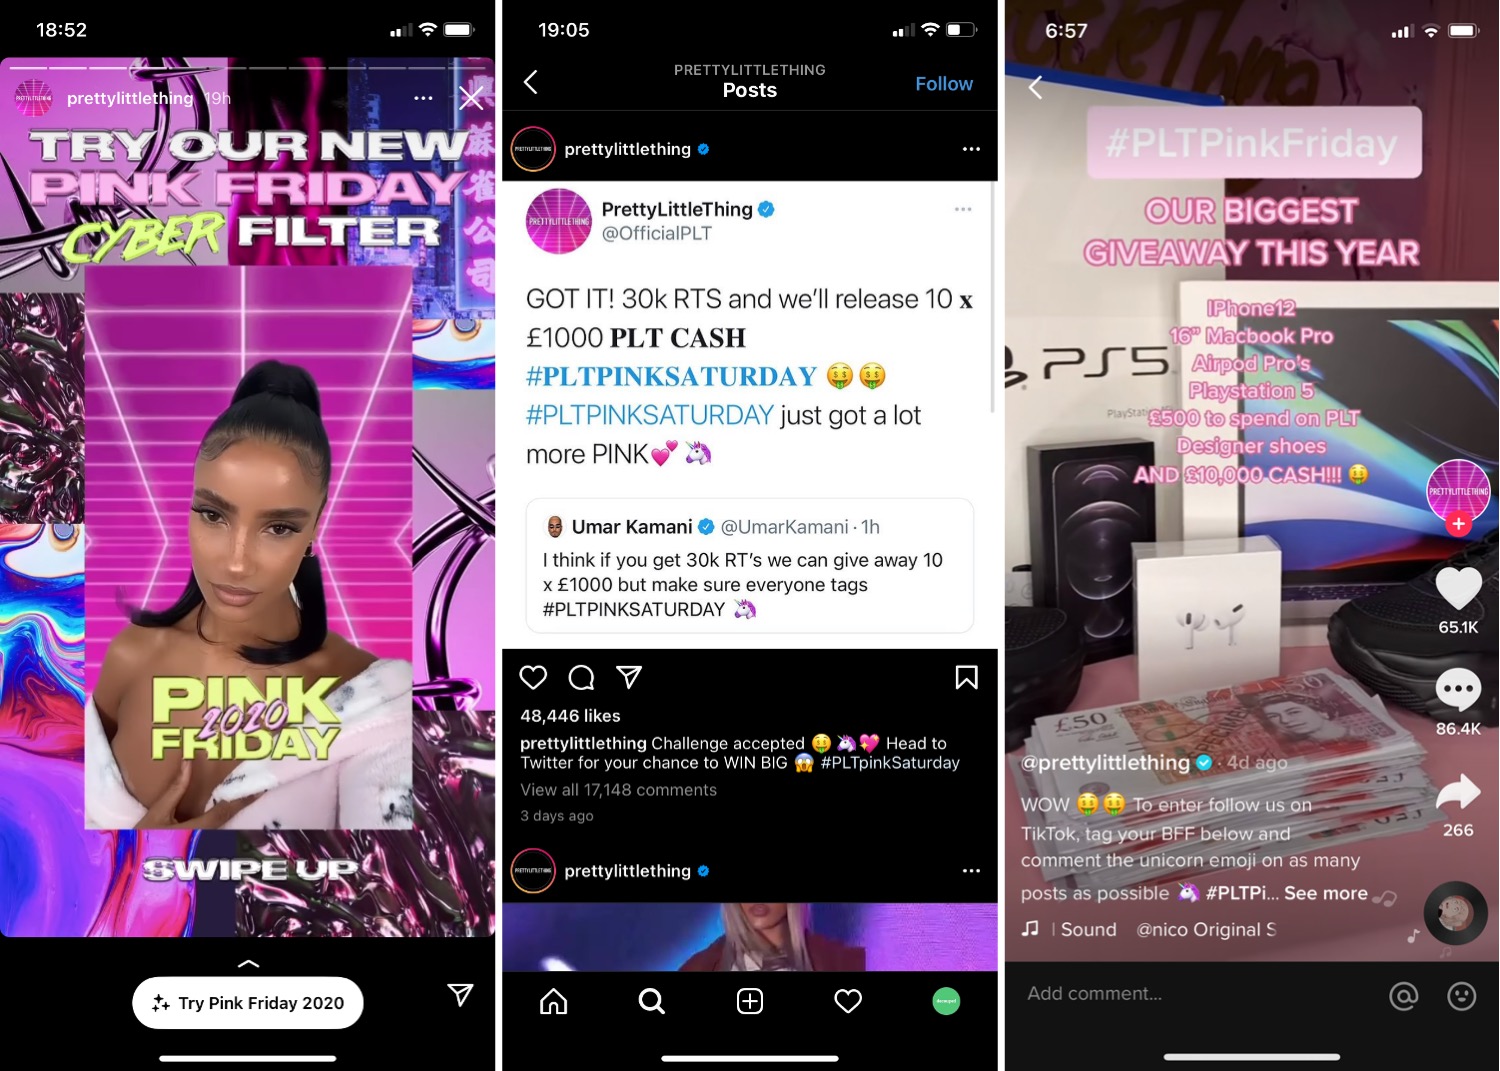 PrettyLittleThing's Black Friday experience on social media 